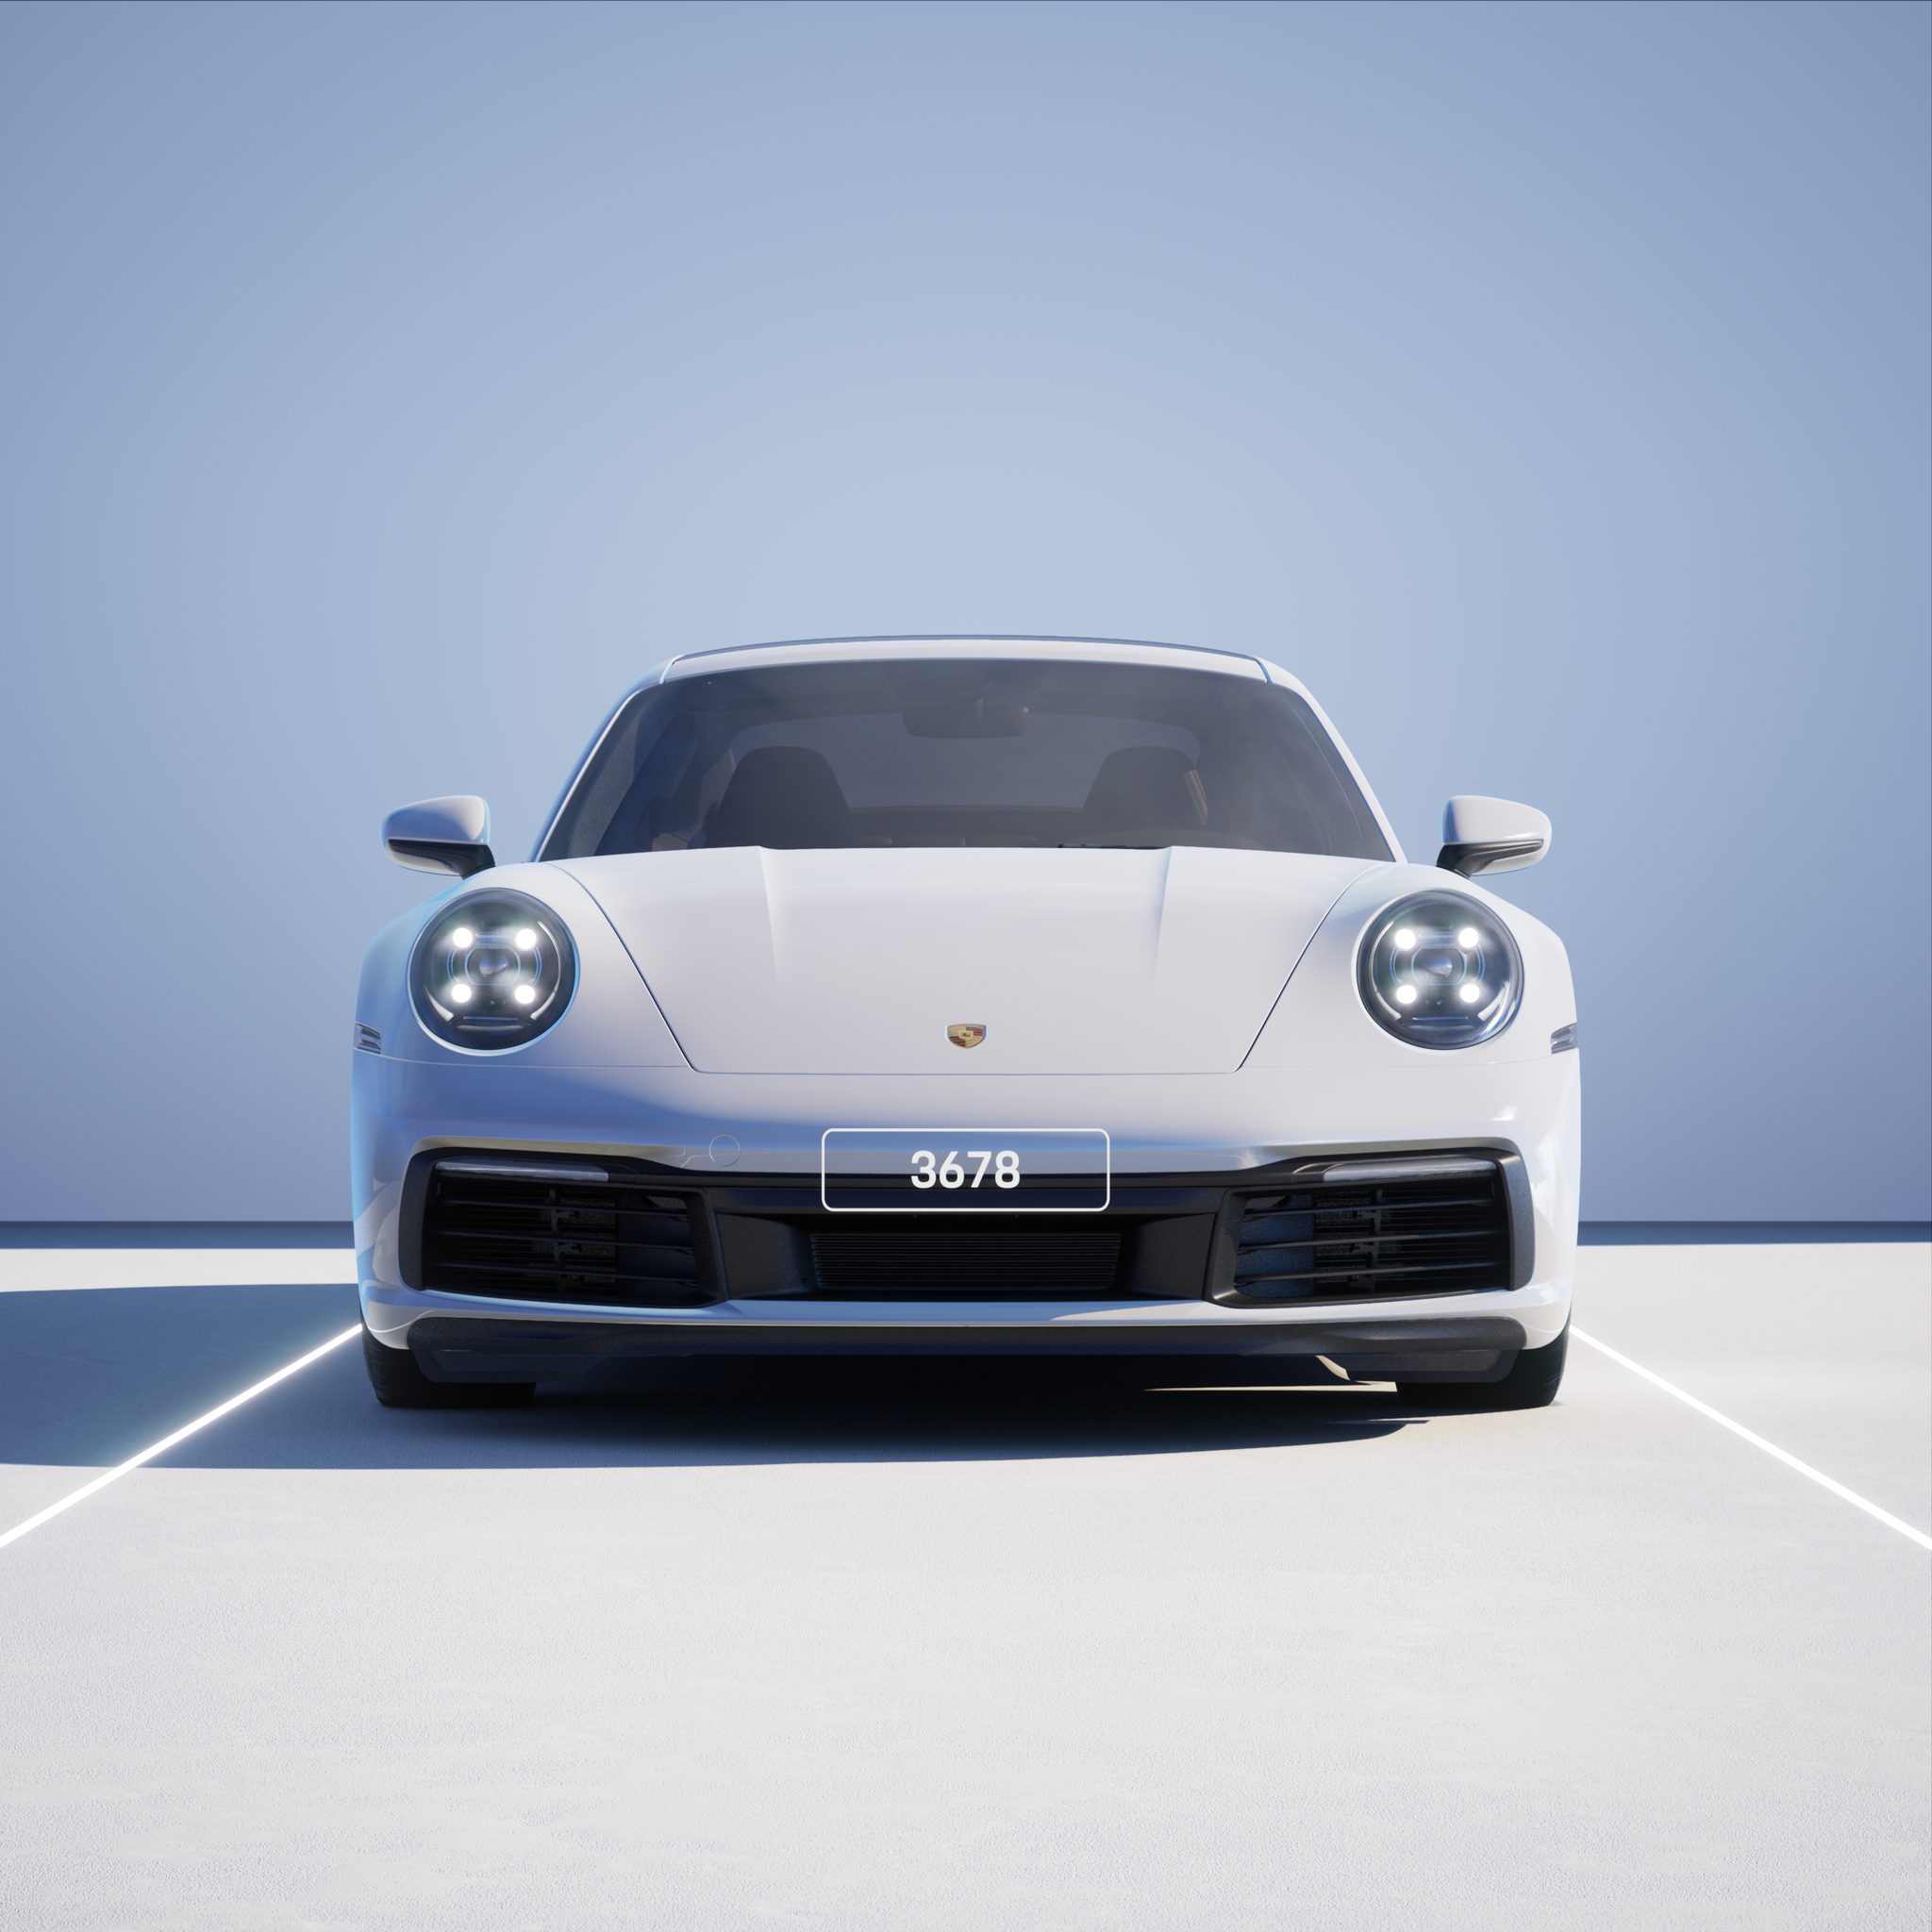 The PORSCHΞ 911 3678 image in phase